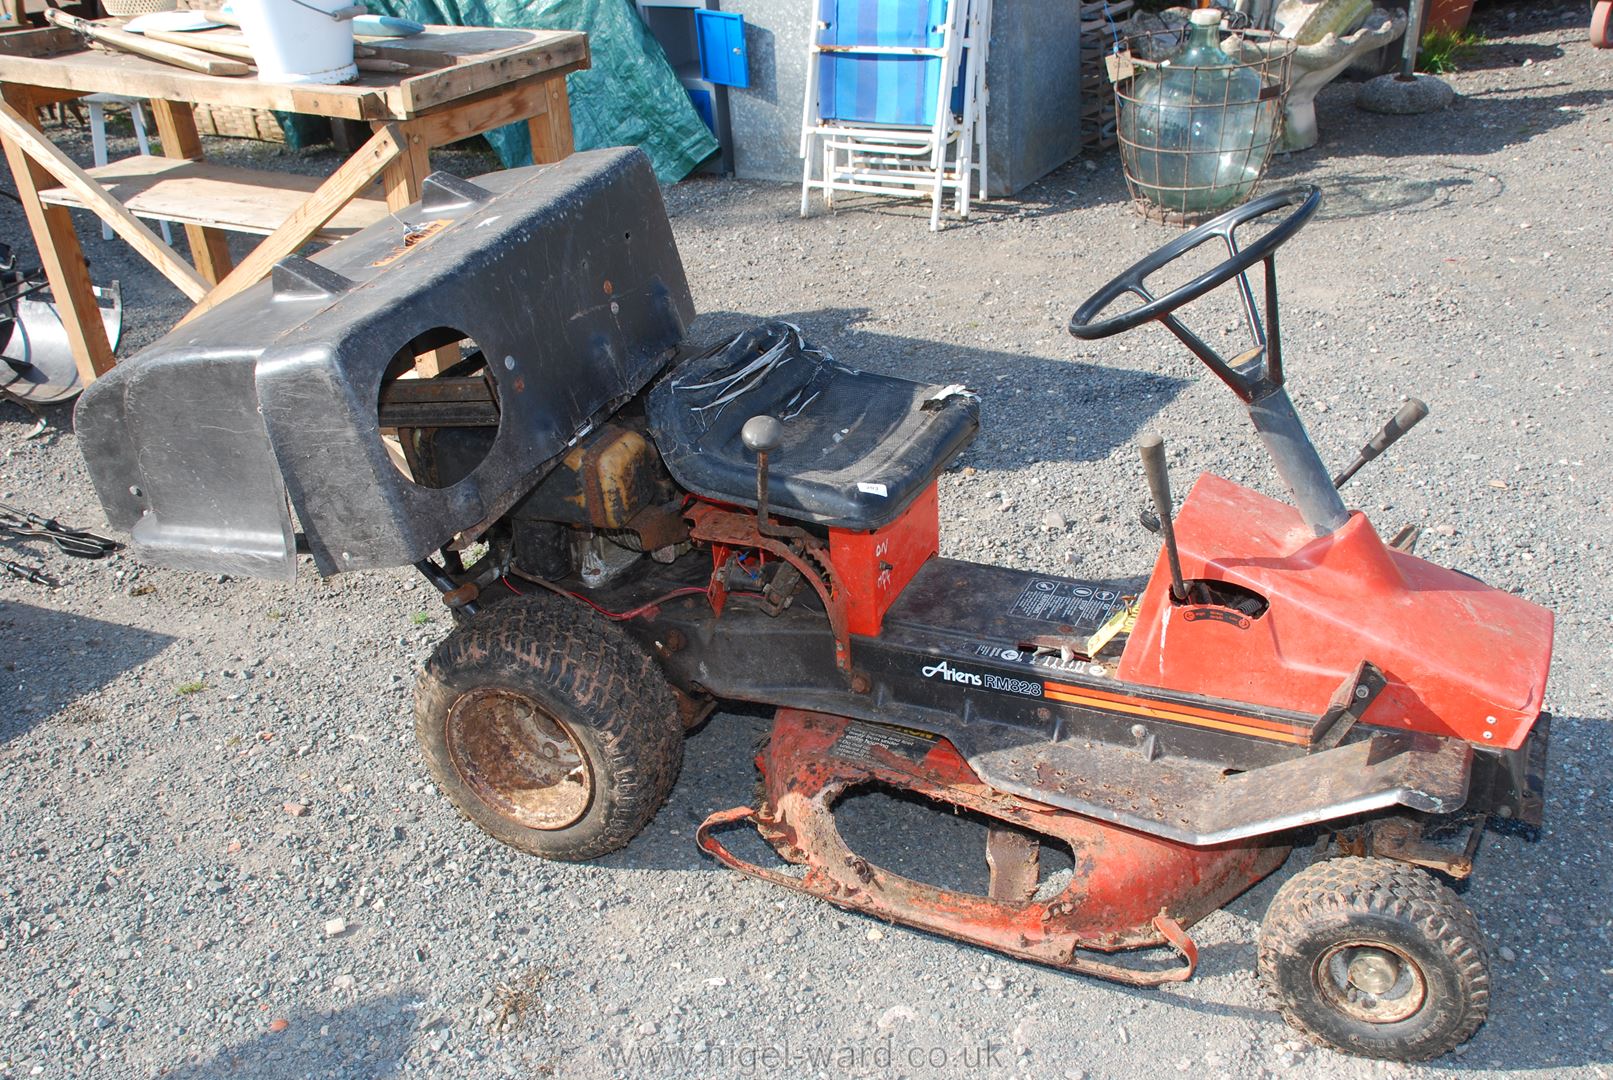 Ariens RM 828 ride on mower with collection box.